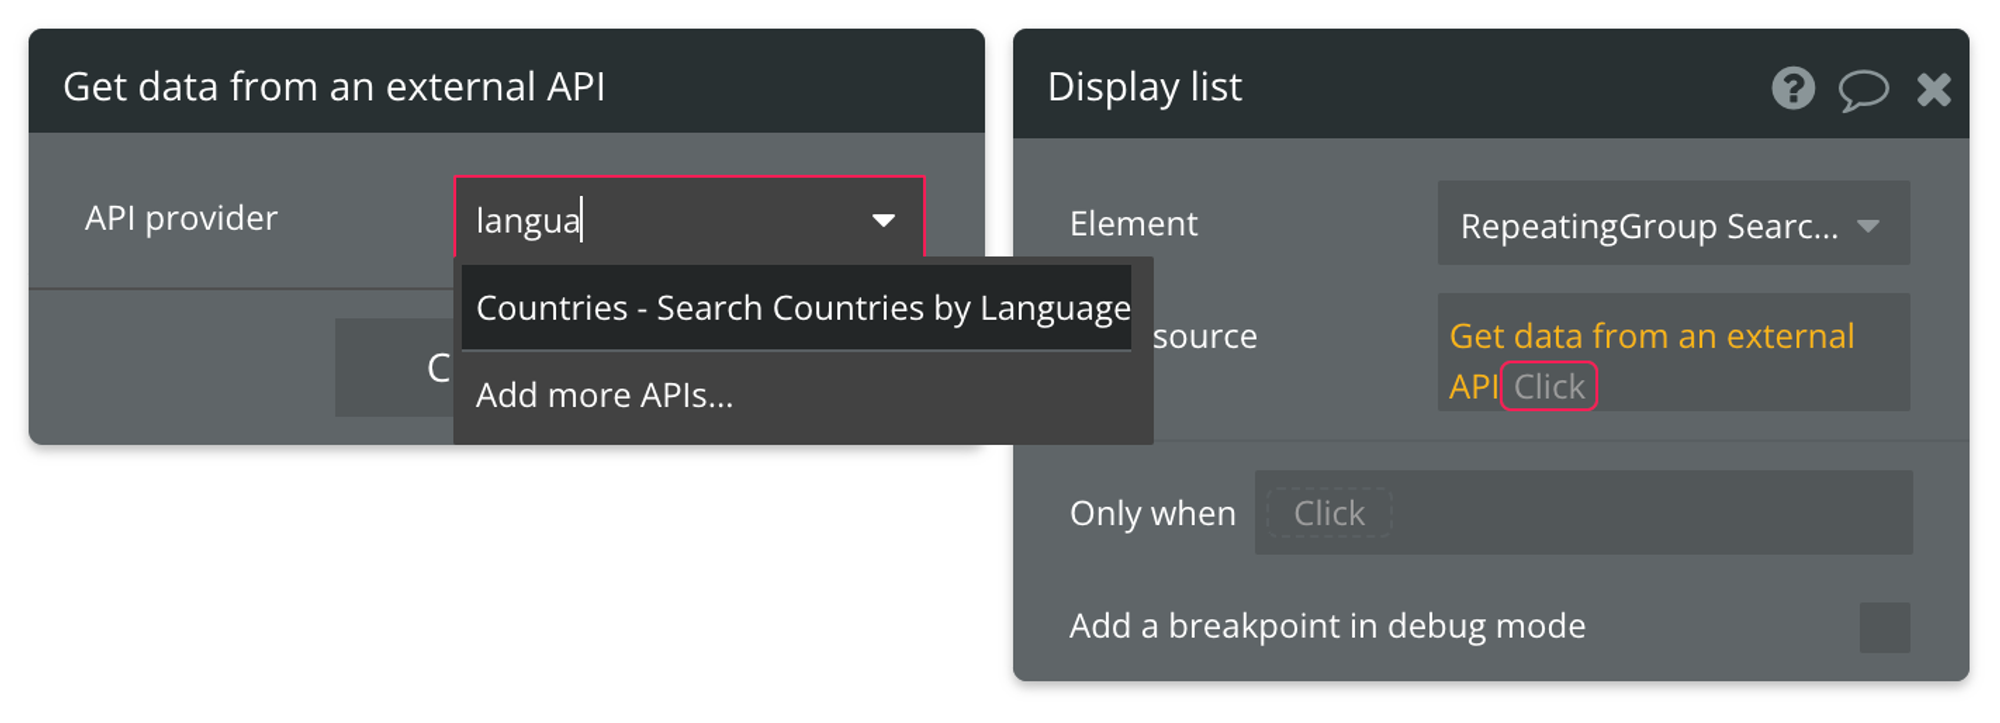 Select "Get data from external API" from the list of data sources, then find Countries - Search Countries by Language from the list of API providers